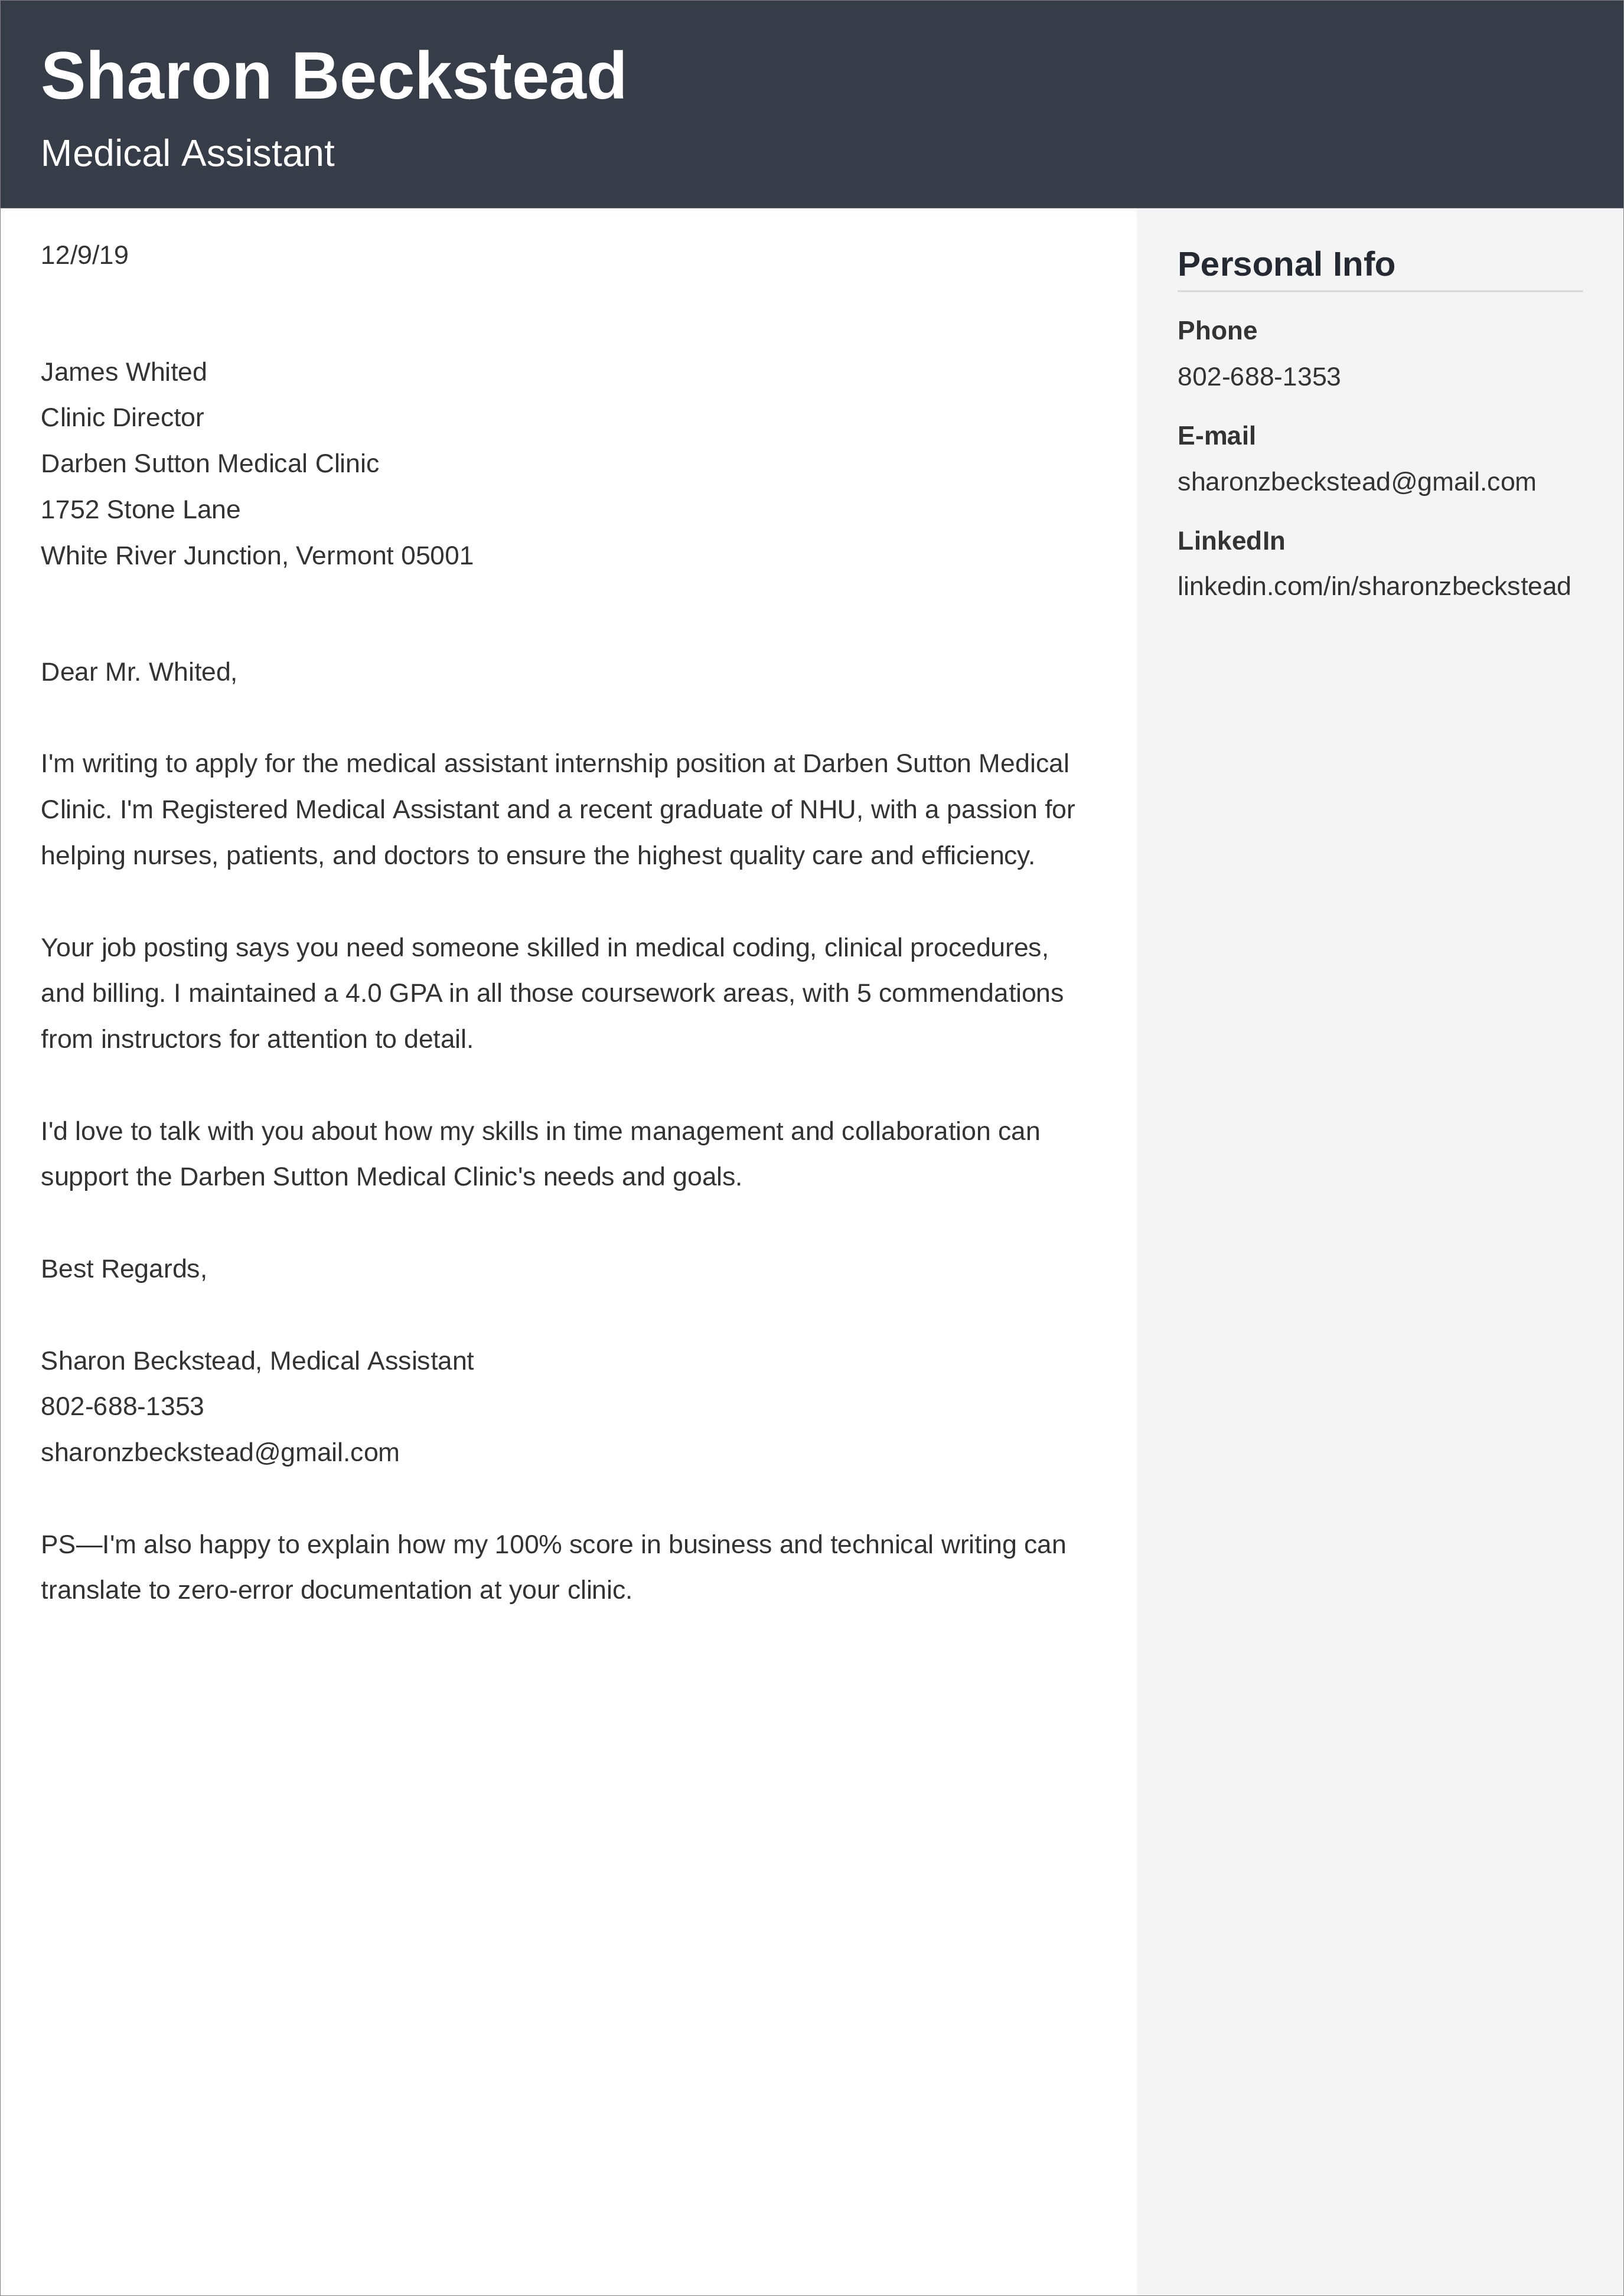 If Job Doesn't Ask For Cover Letter from cdn-images.resumelab.com